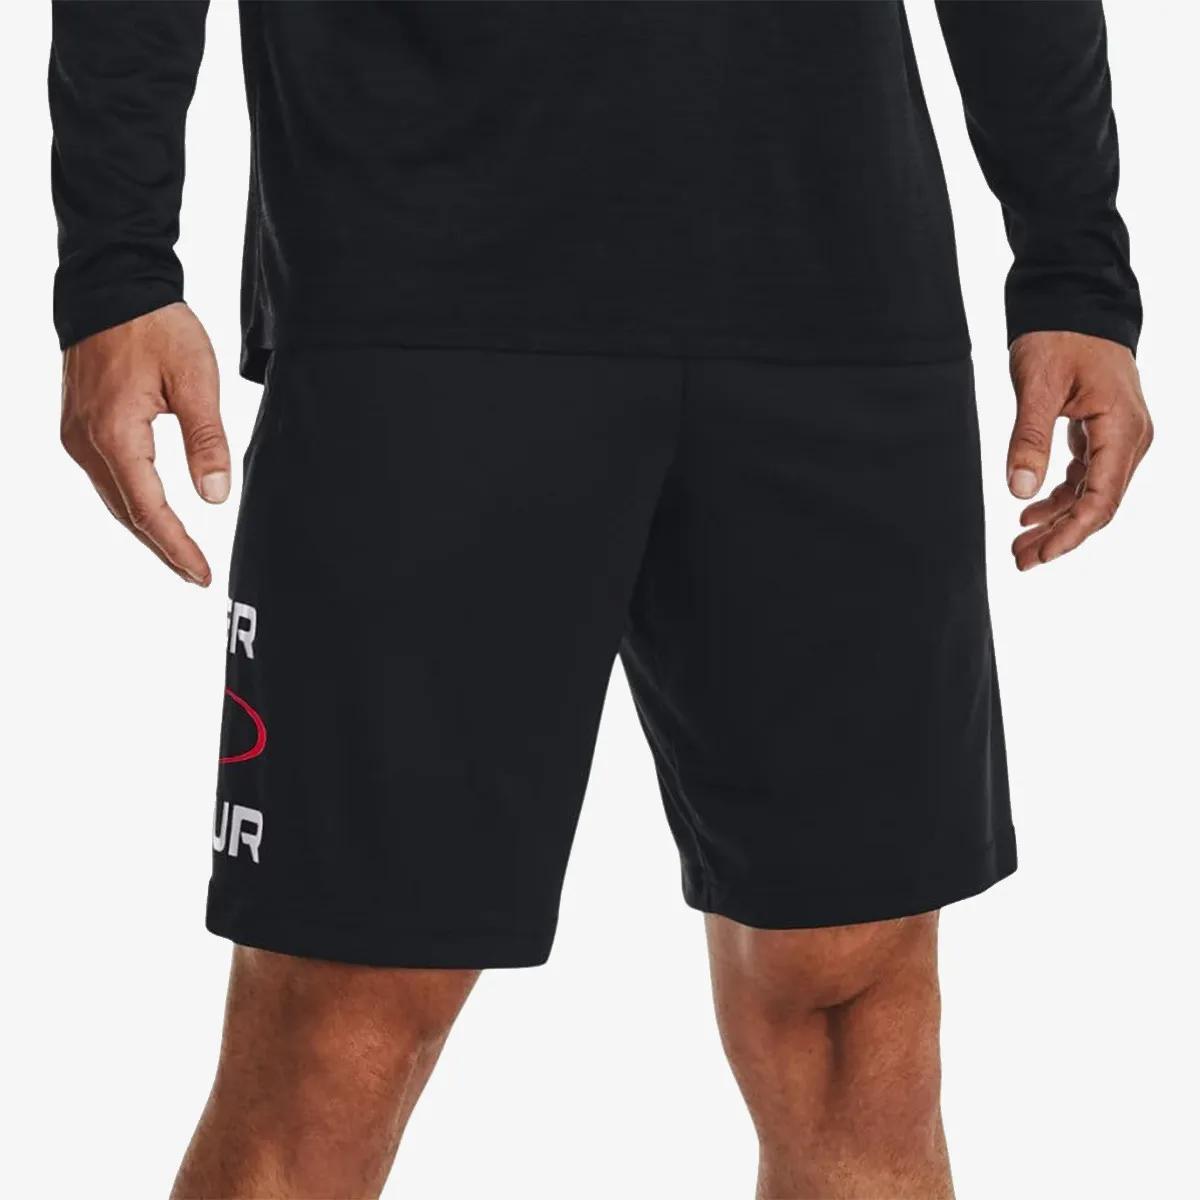 Under Armour Woven Graphic Shorts 